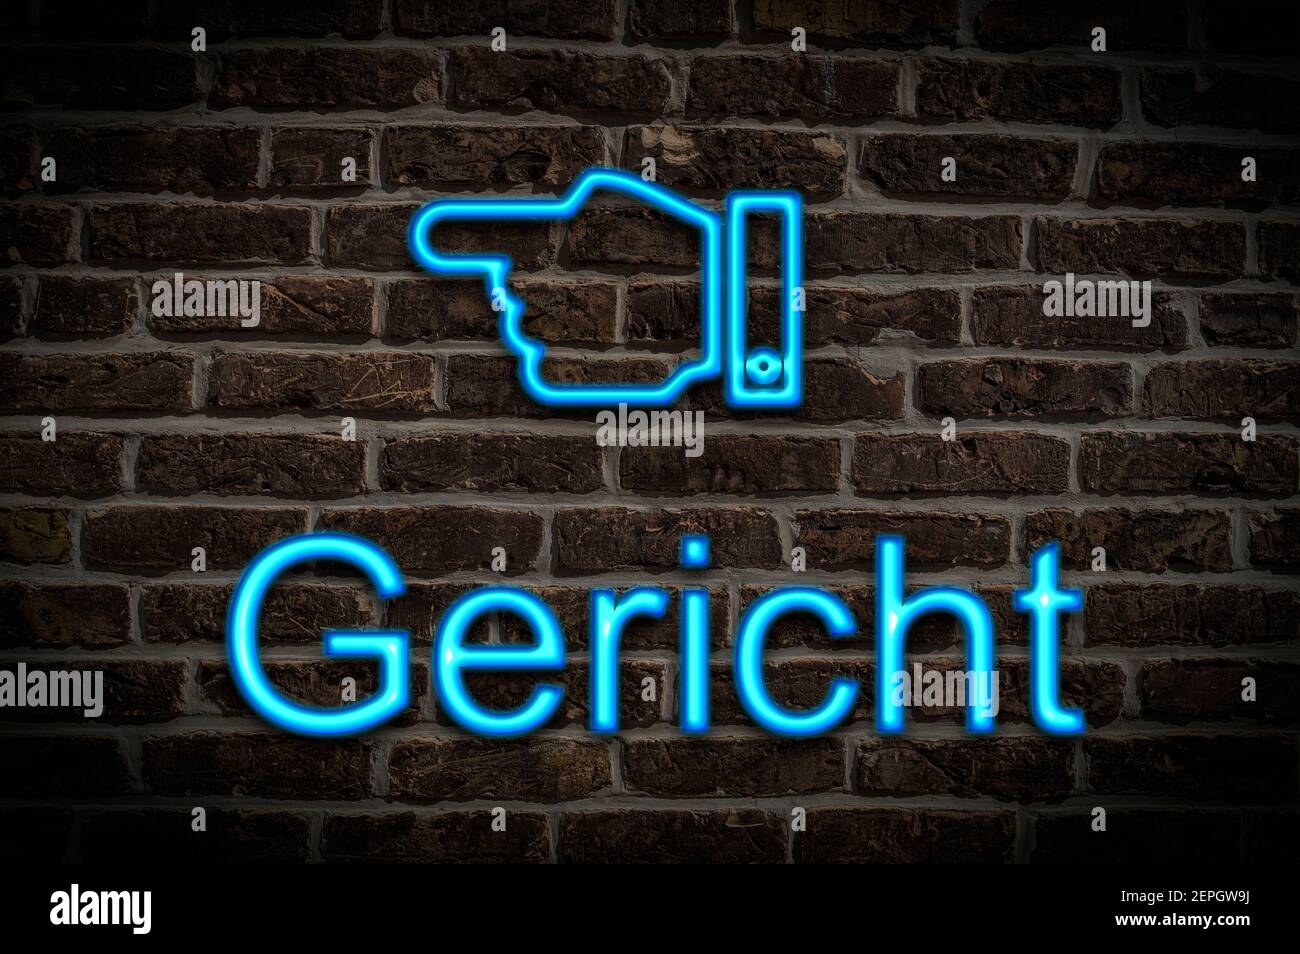 Detail photo of a a neon sign on a wall with the german inscription Gericht court of justice) Stock Photo